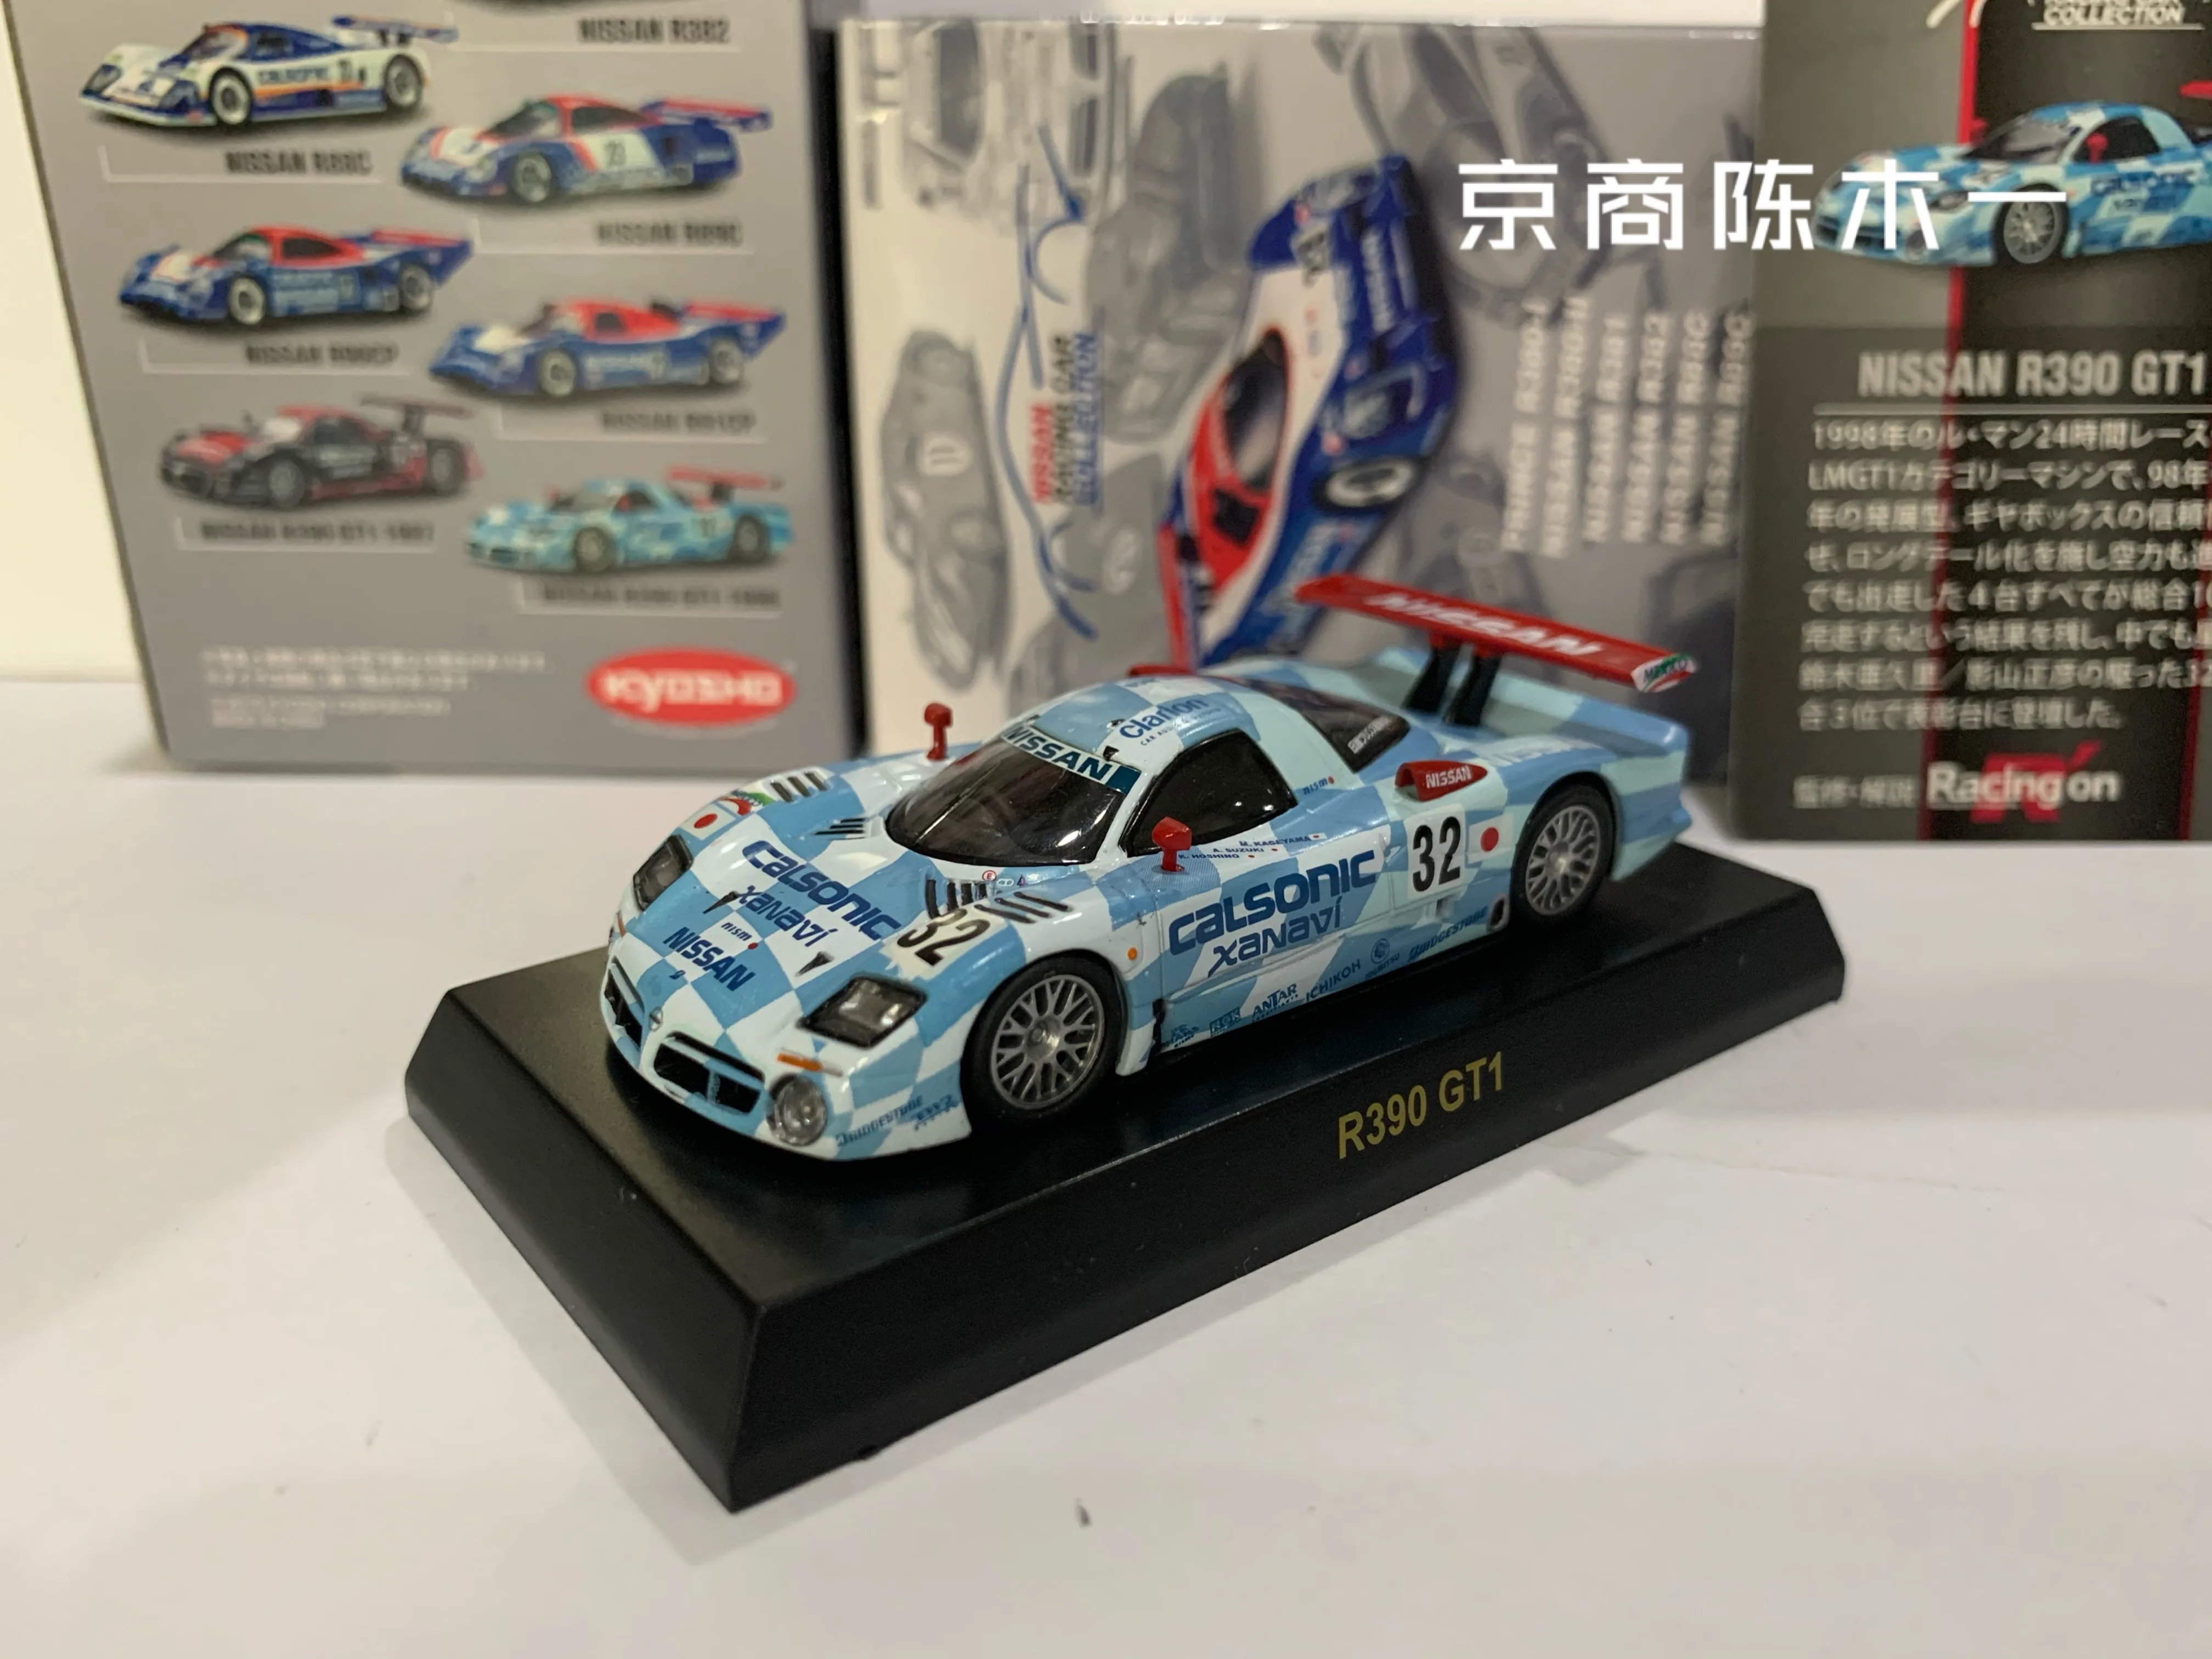 

1/64 KYOSHO NISSAN R390 GT1 Calsonic #32 Collection of die cast alloy trolley model ornaments